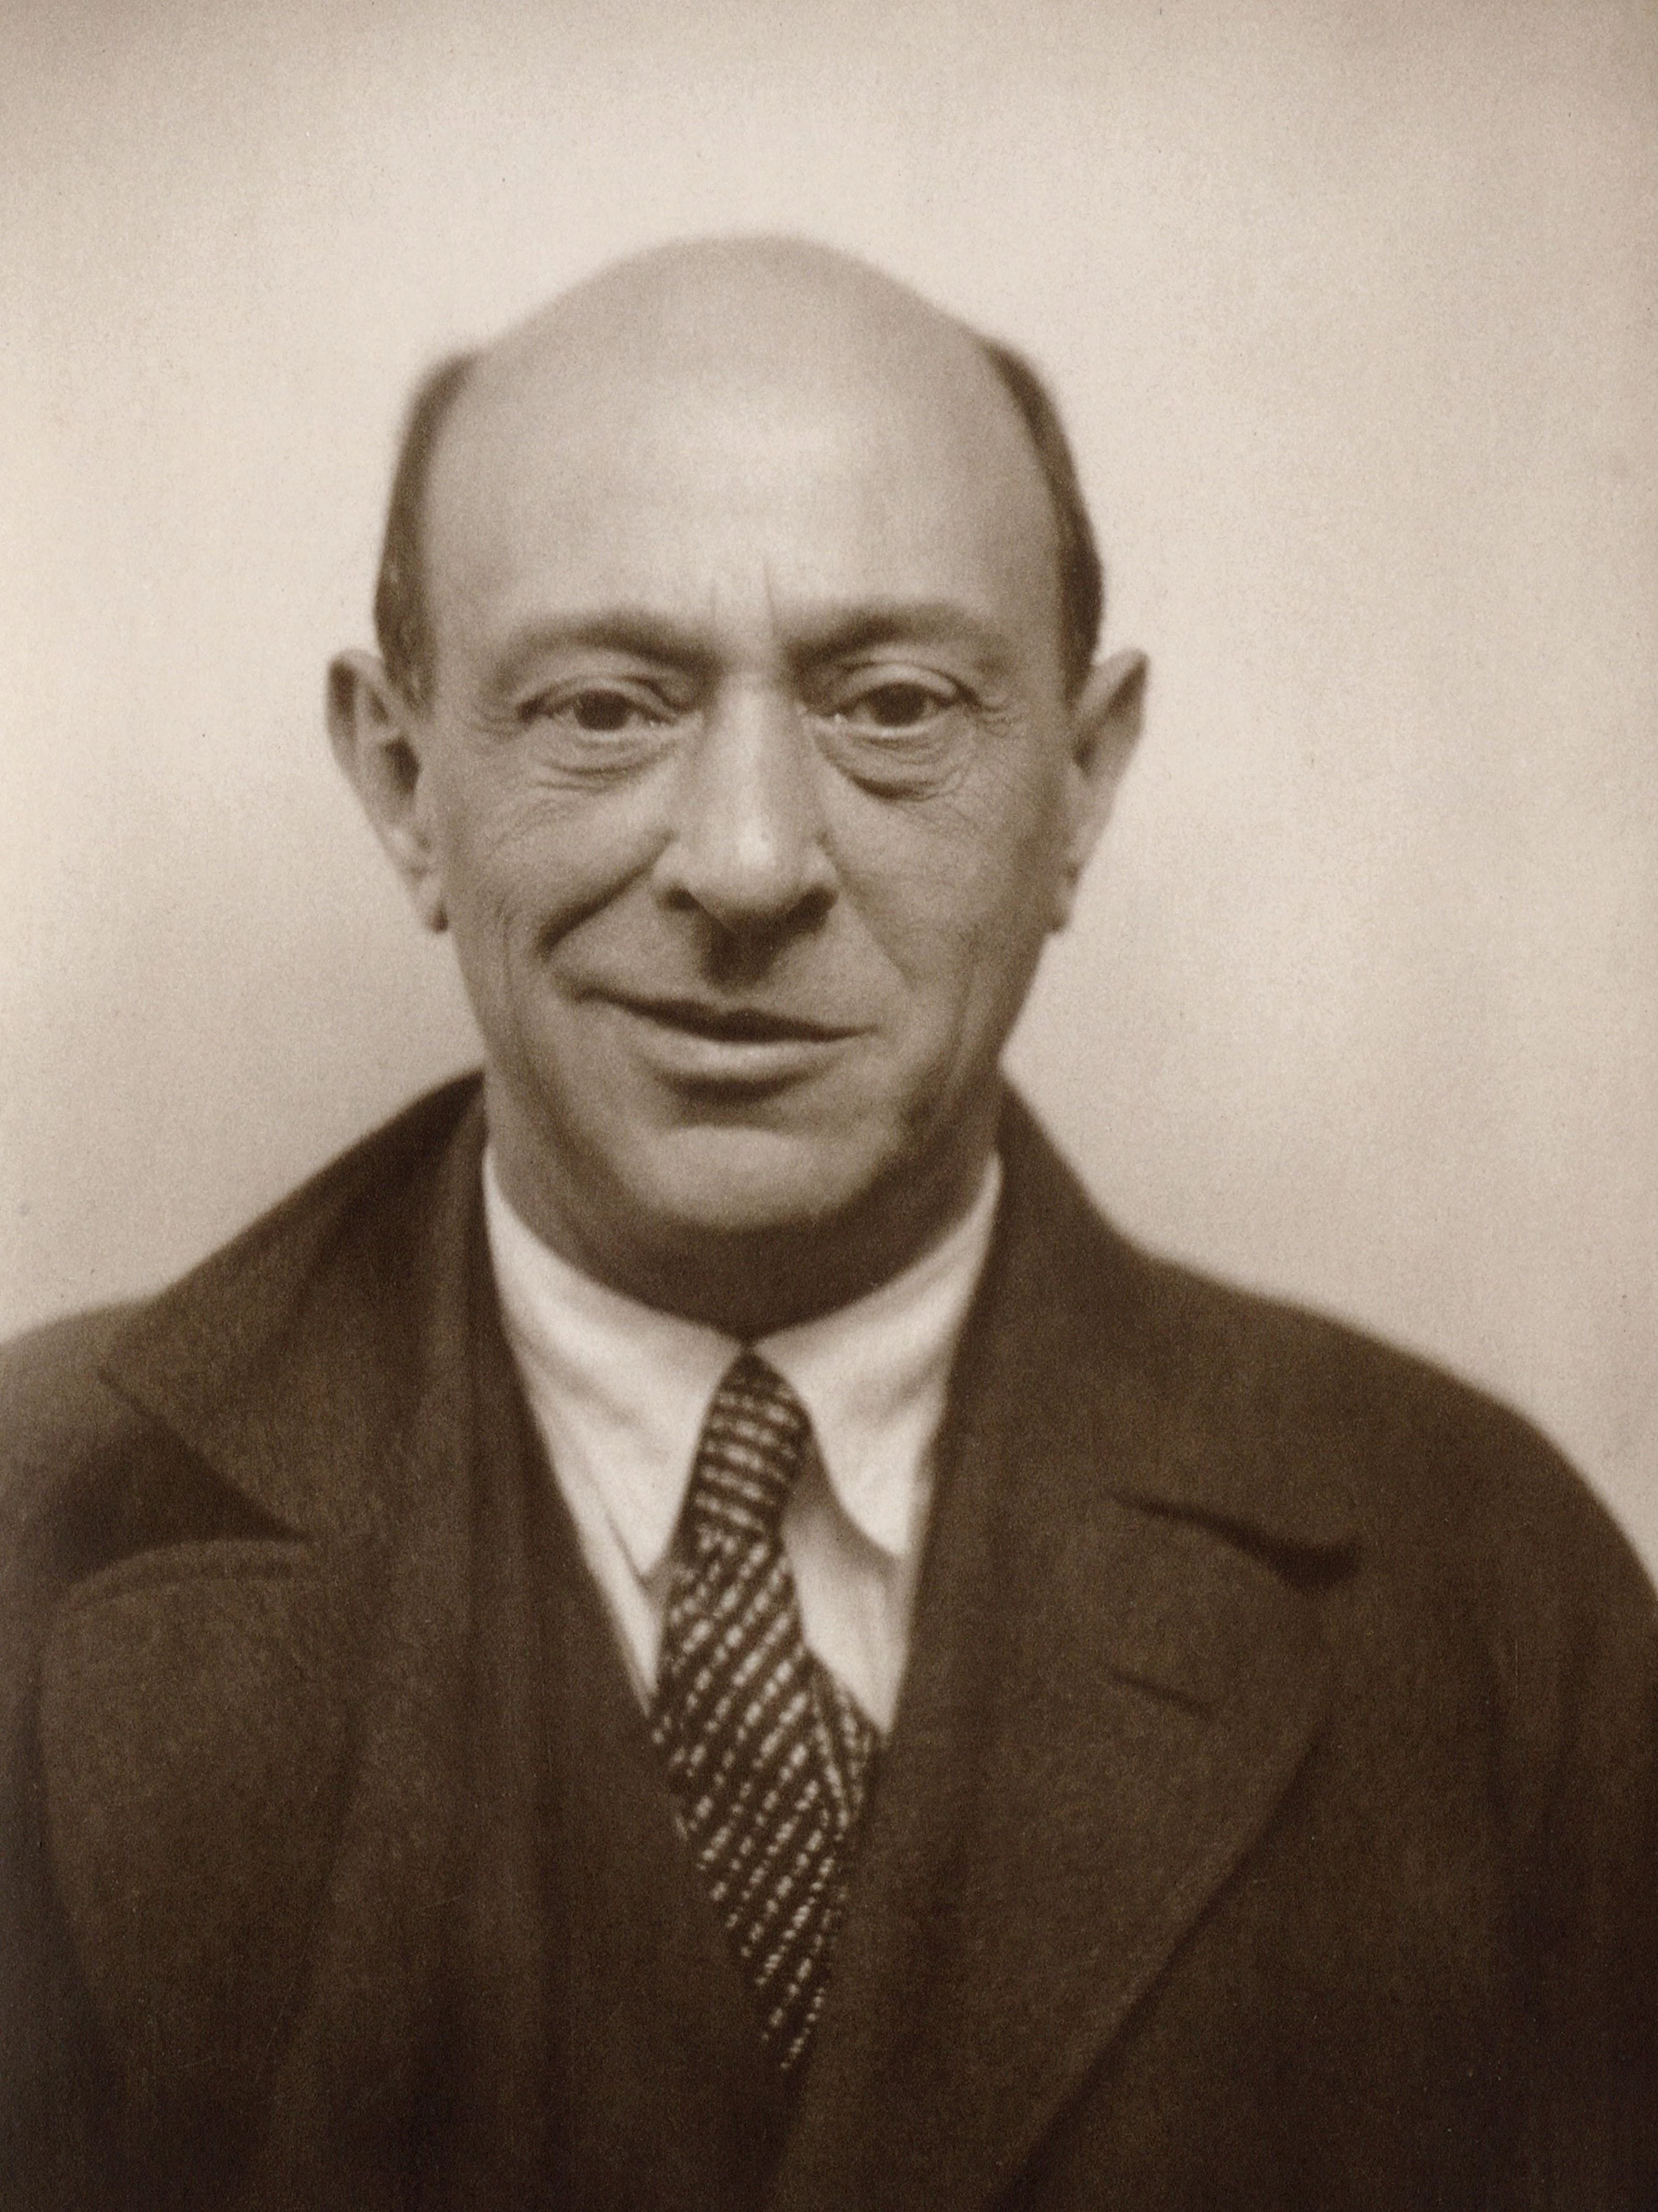 Portrait of Arnold Schoenberg. He is looking directly towards the viewer, with a half-smile.